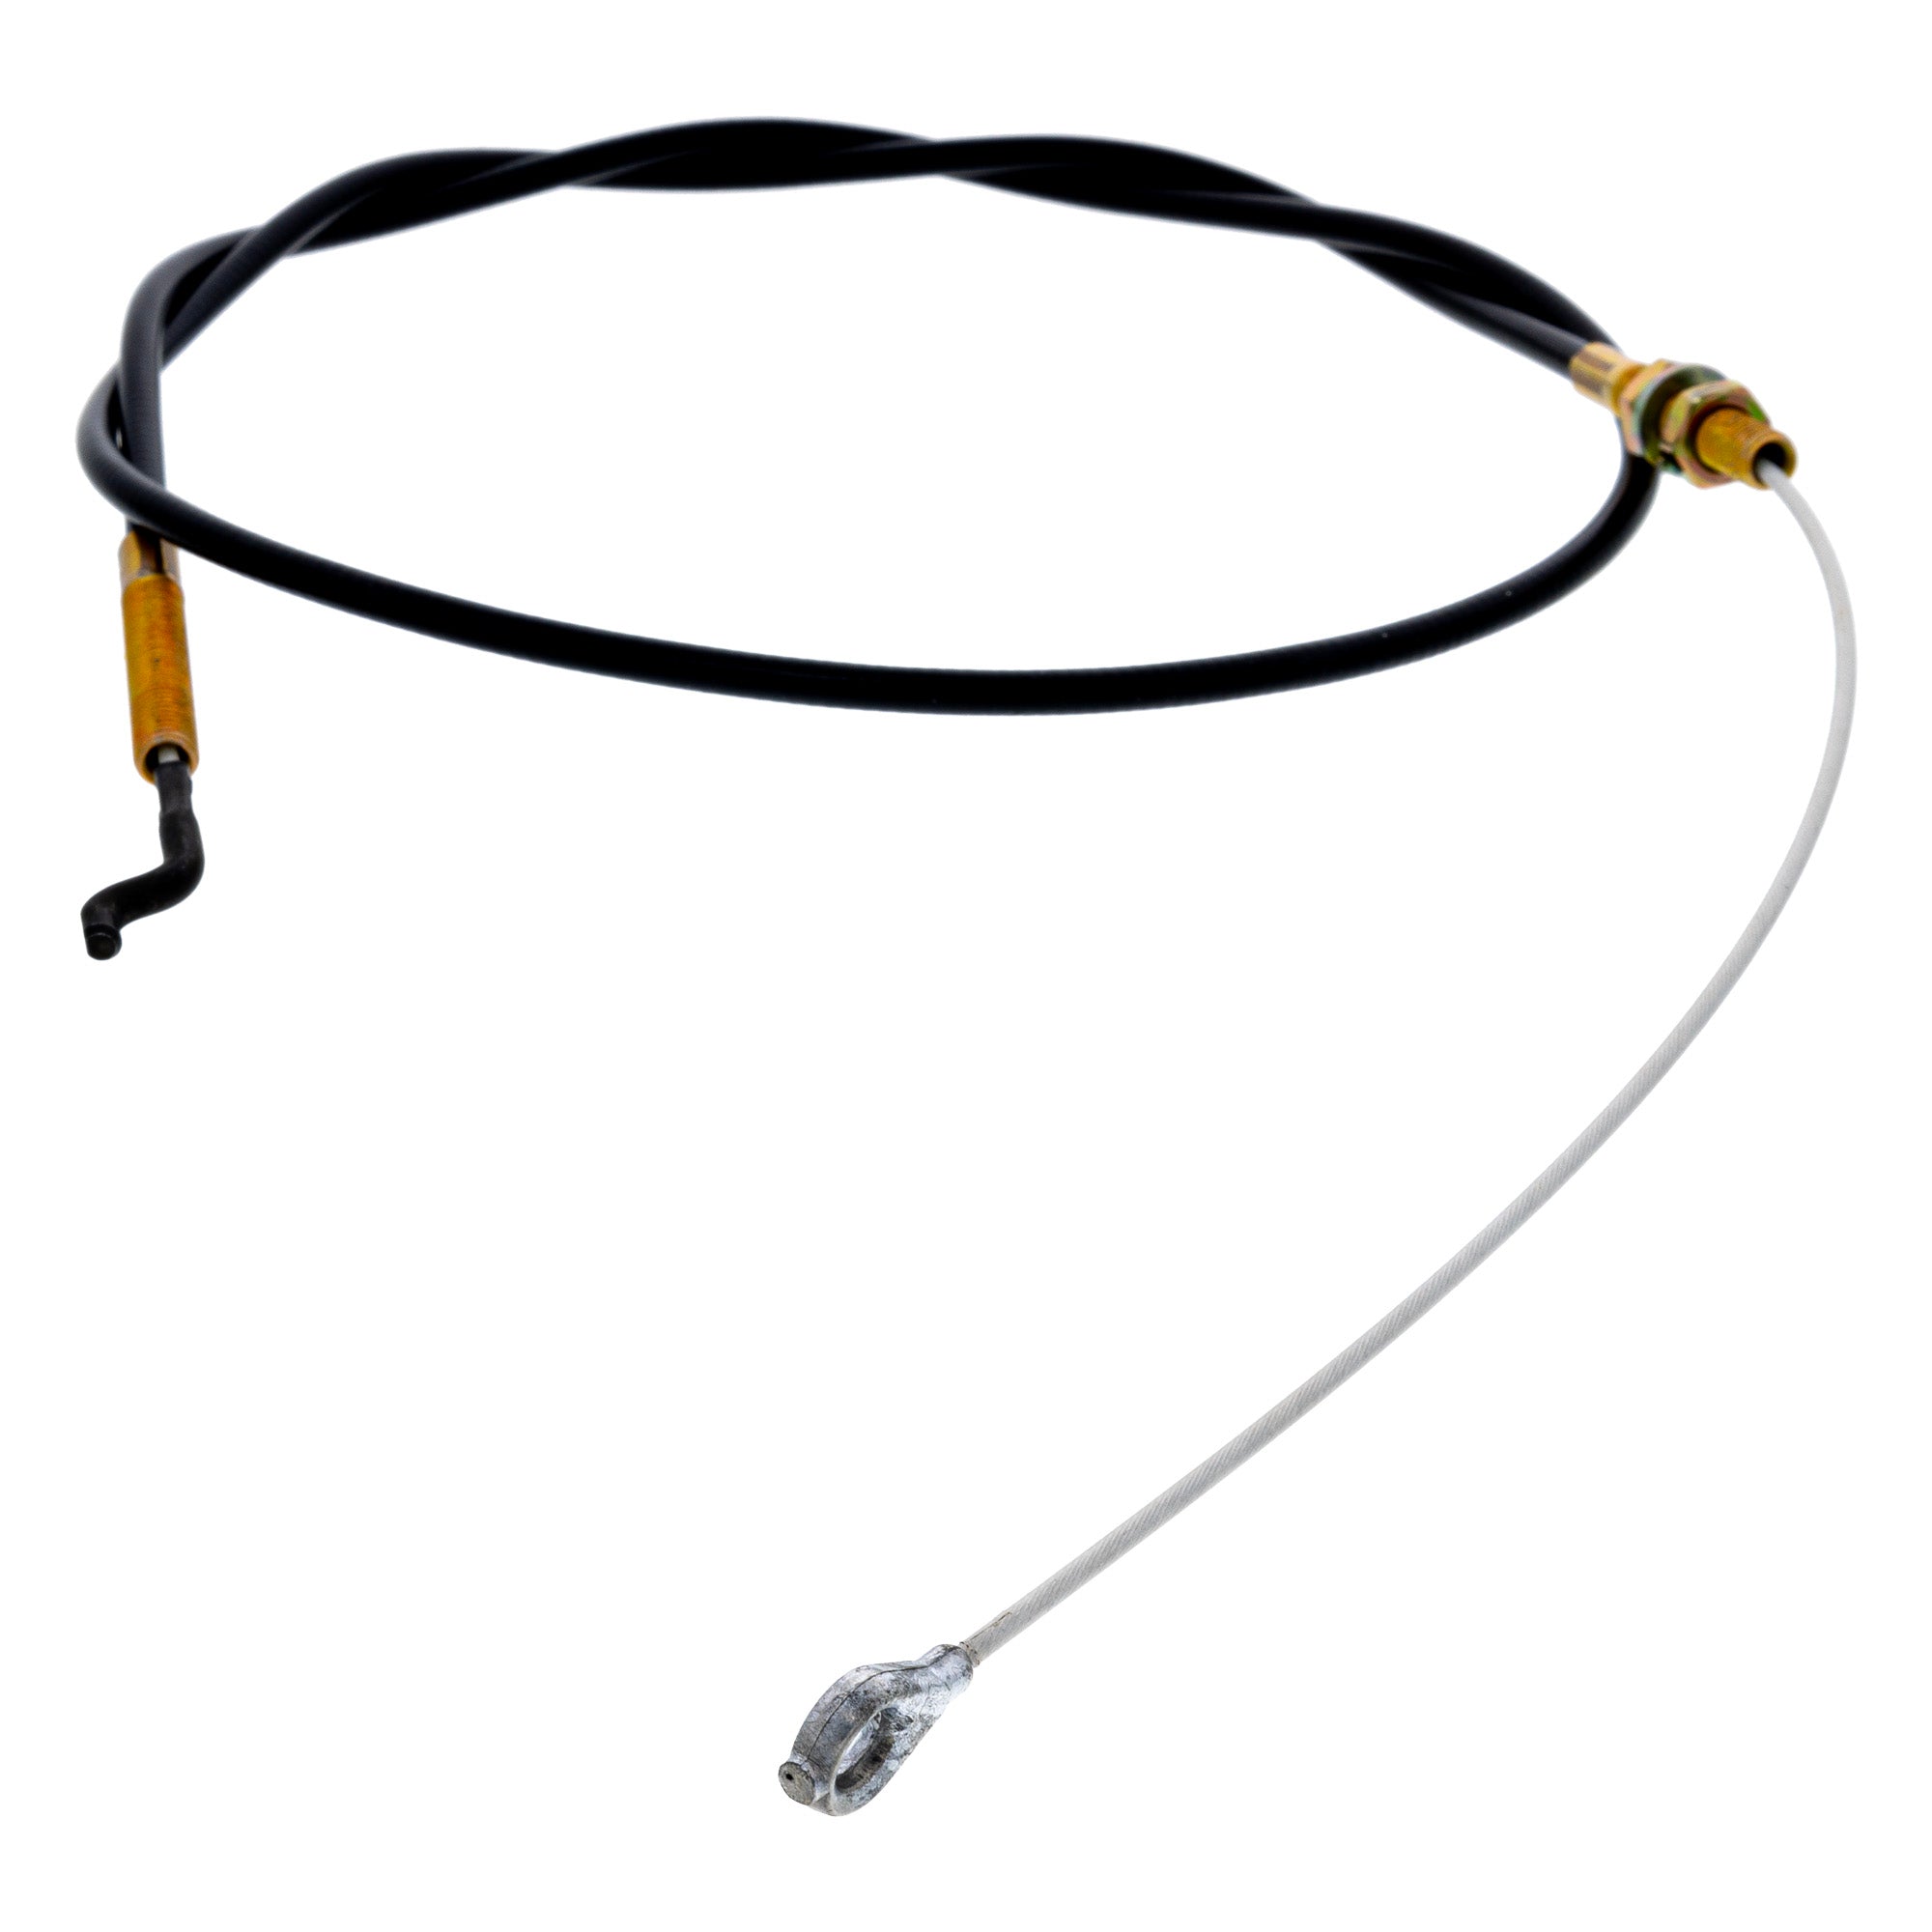 MTD 946-0496 Clutch Cable 42"